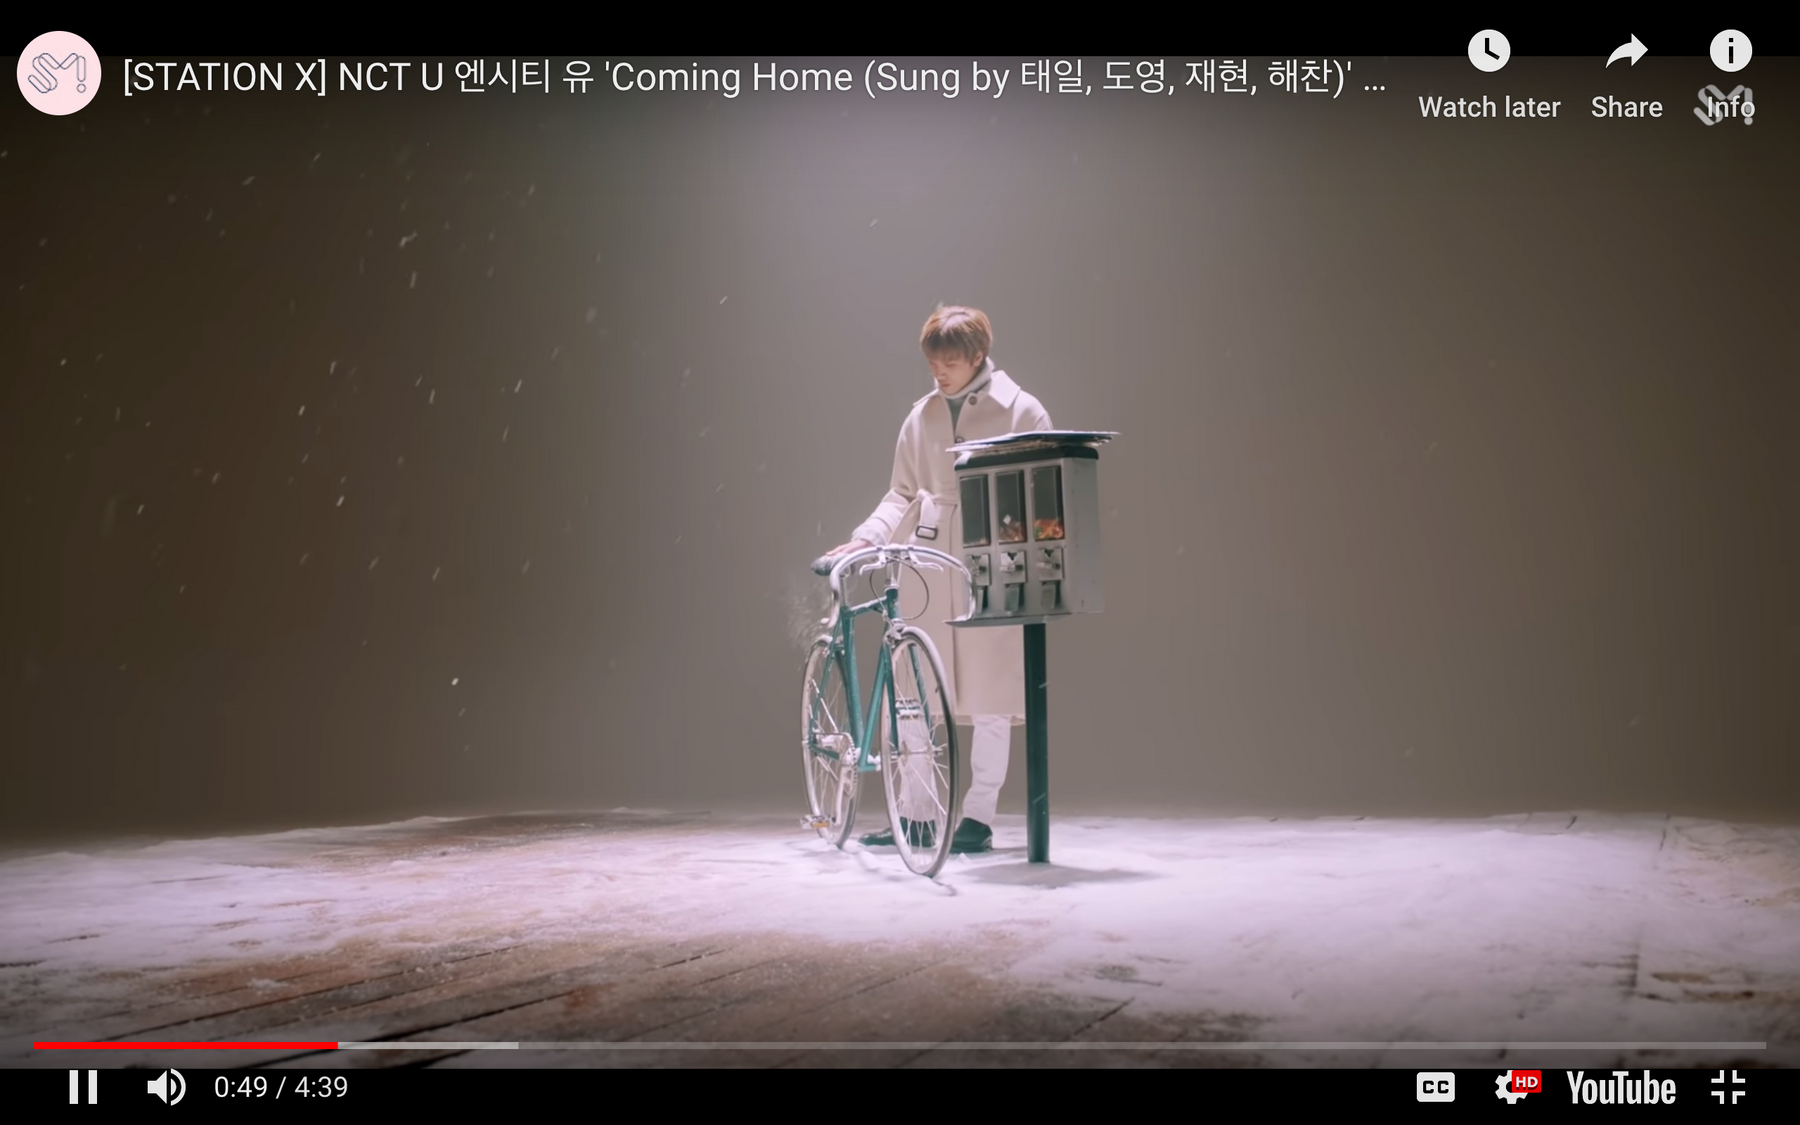 NCT U unveils the MV of "Coming Home" - Kpopshop